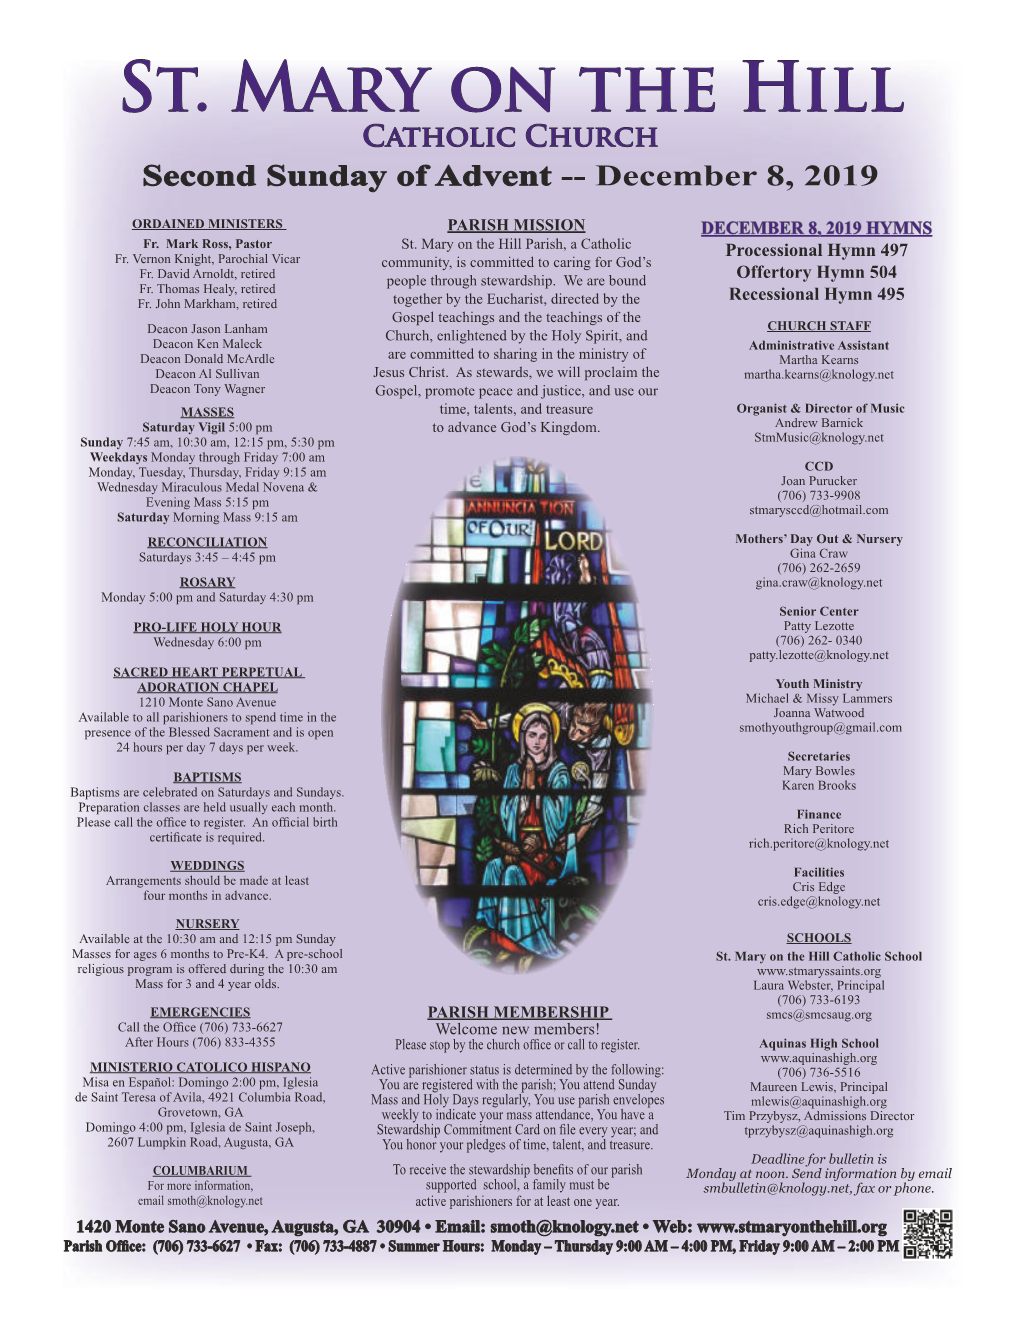 St. Mary on the Hill Catholic Church Second Sunday of Advent 'HFHPEHU